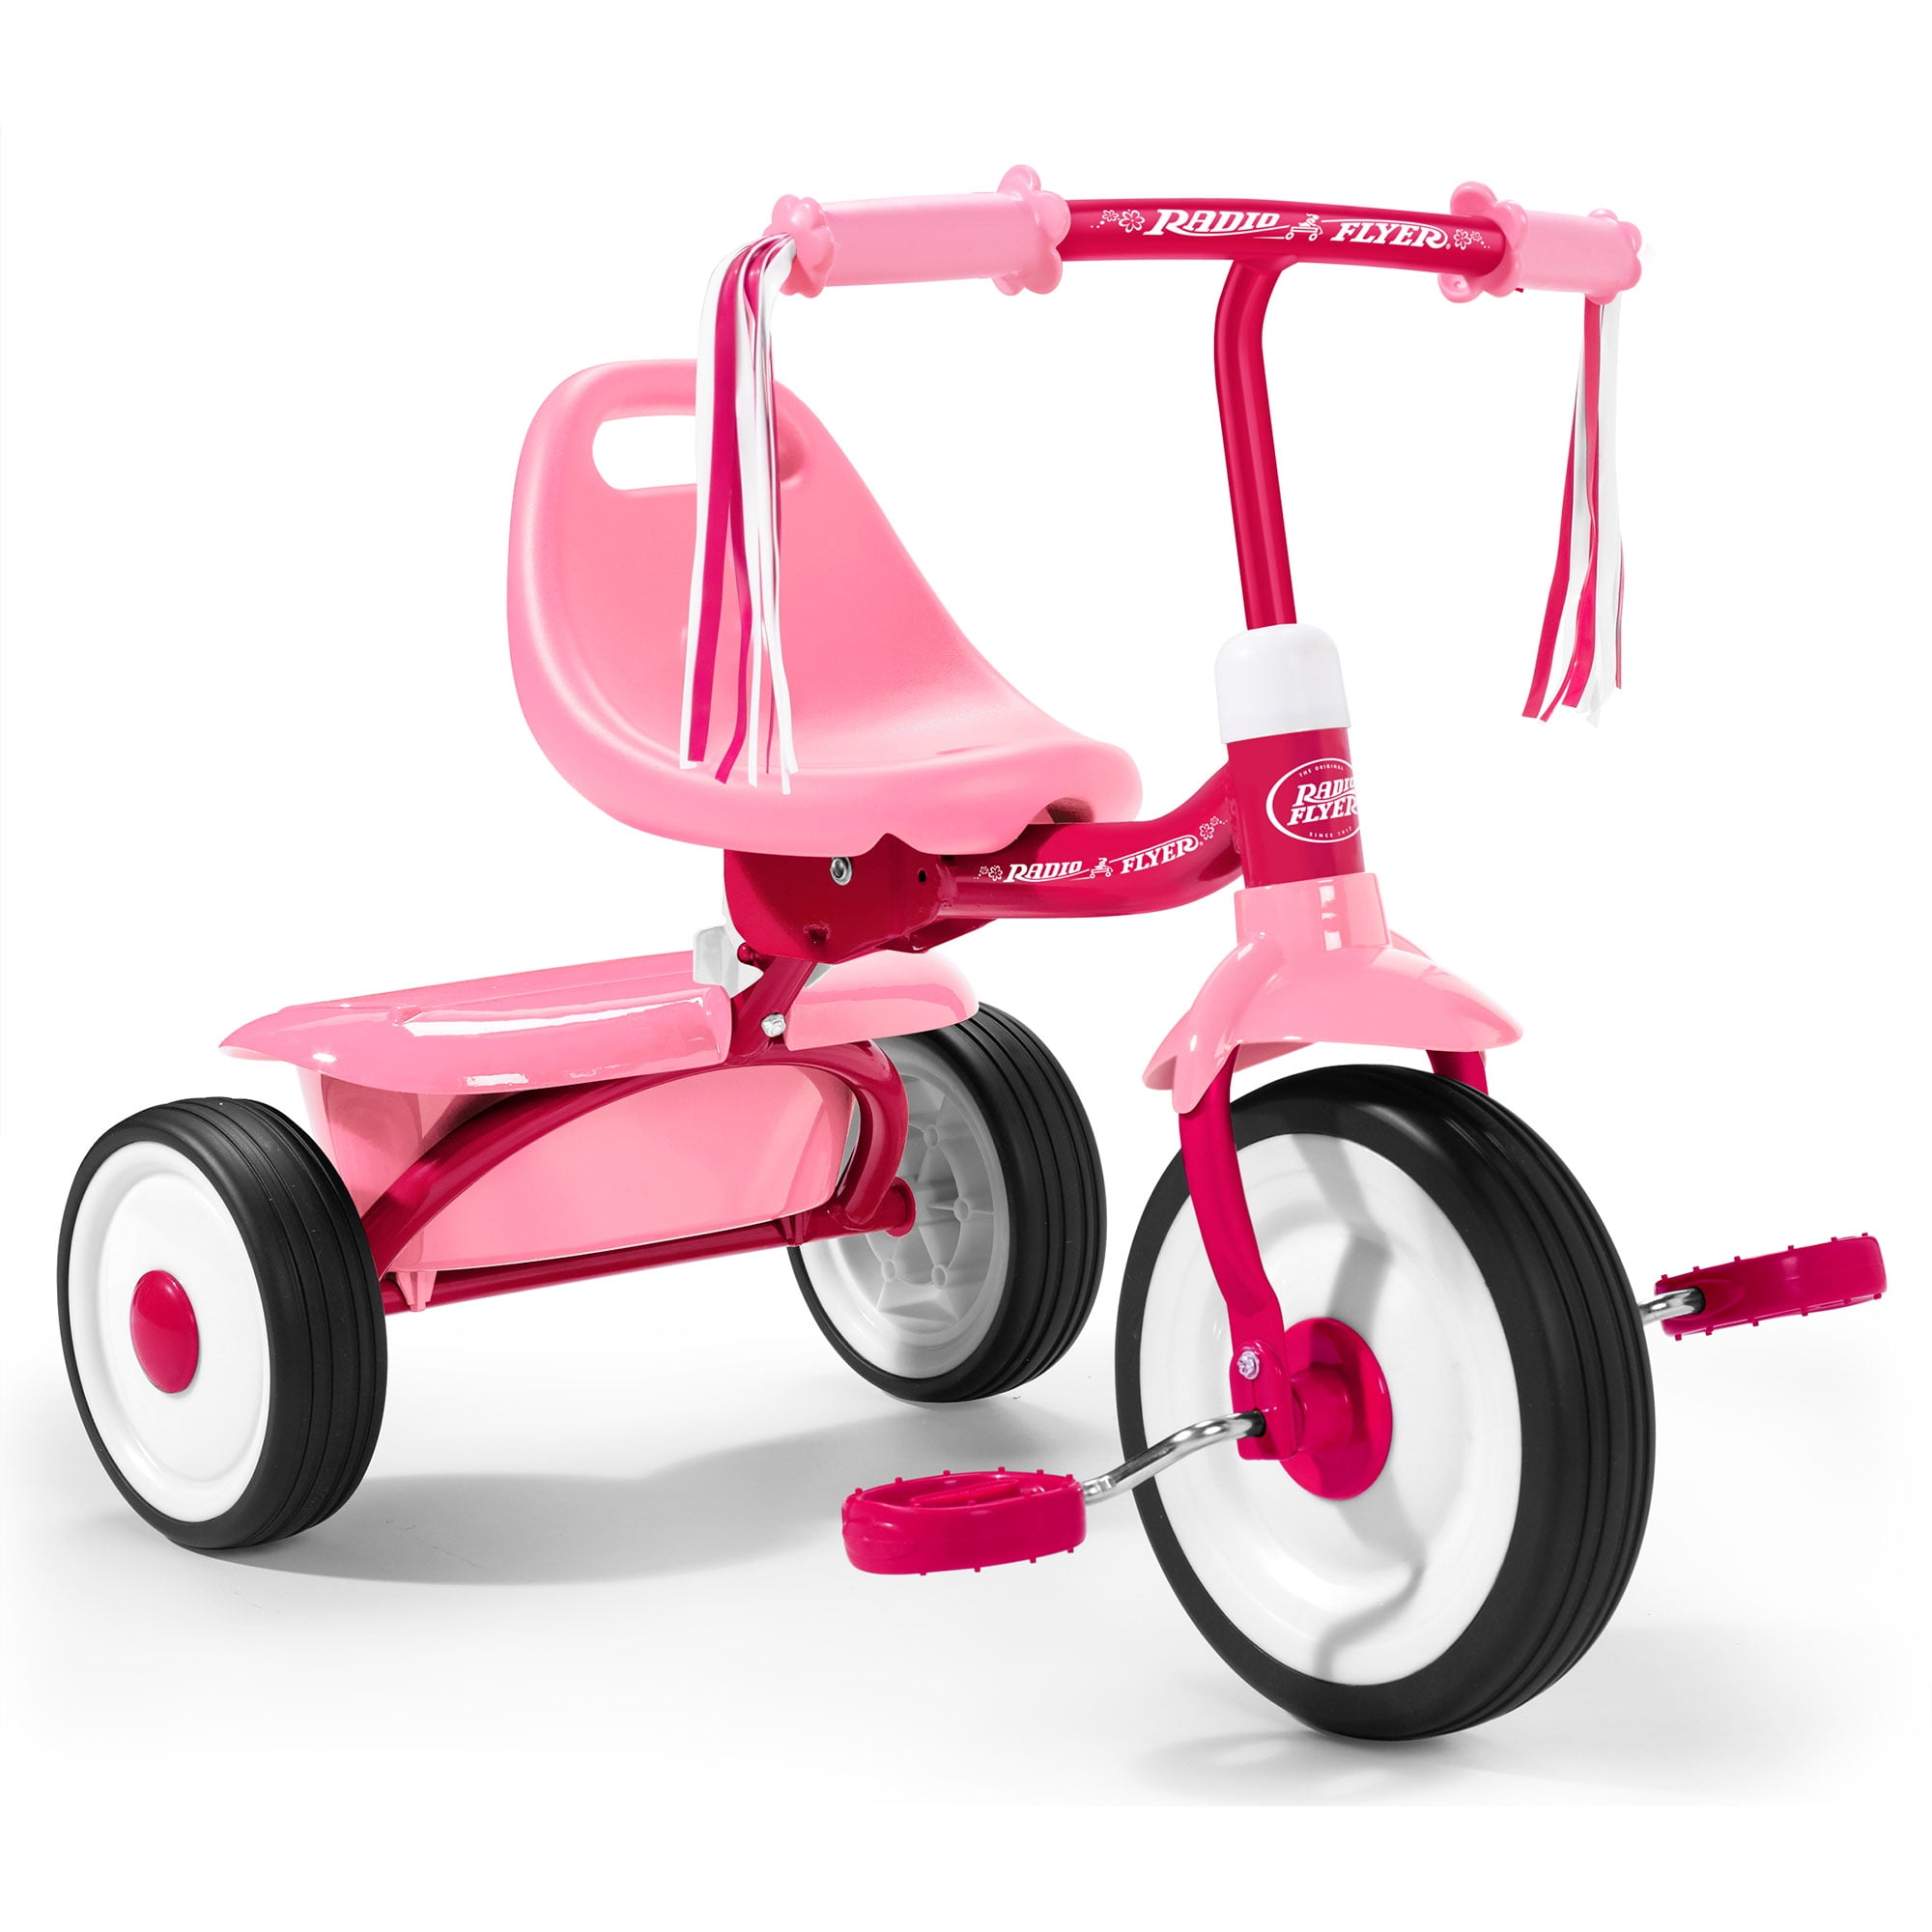 Radio Flyer Model 553 Tricycle Solid Steel Frame for Dolls Stuffed Toys for sale online 